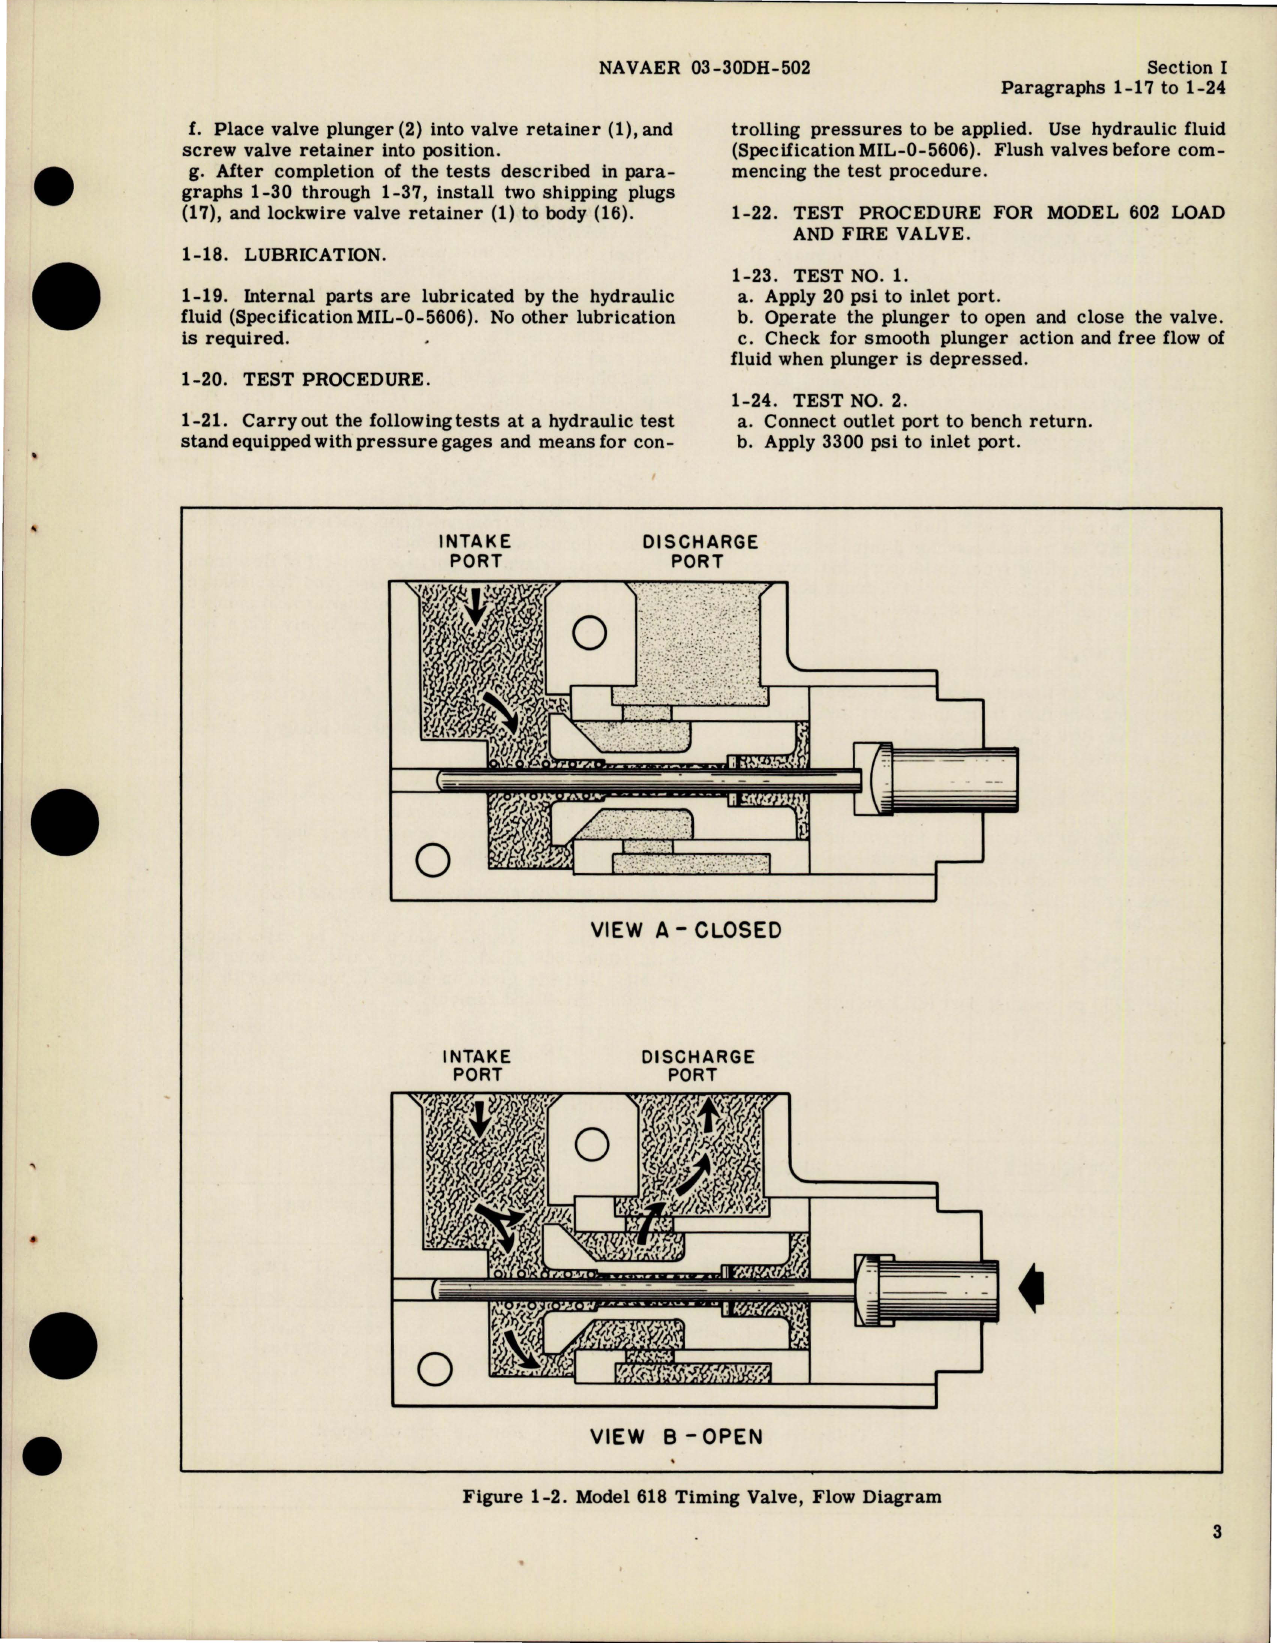 Sample page 5 from AirCorps Library document: Overhaul Instructions with Parts Catalog for Load and Fire Valve 602 and Timing Valve 618 